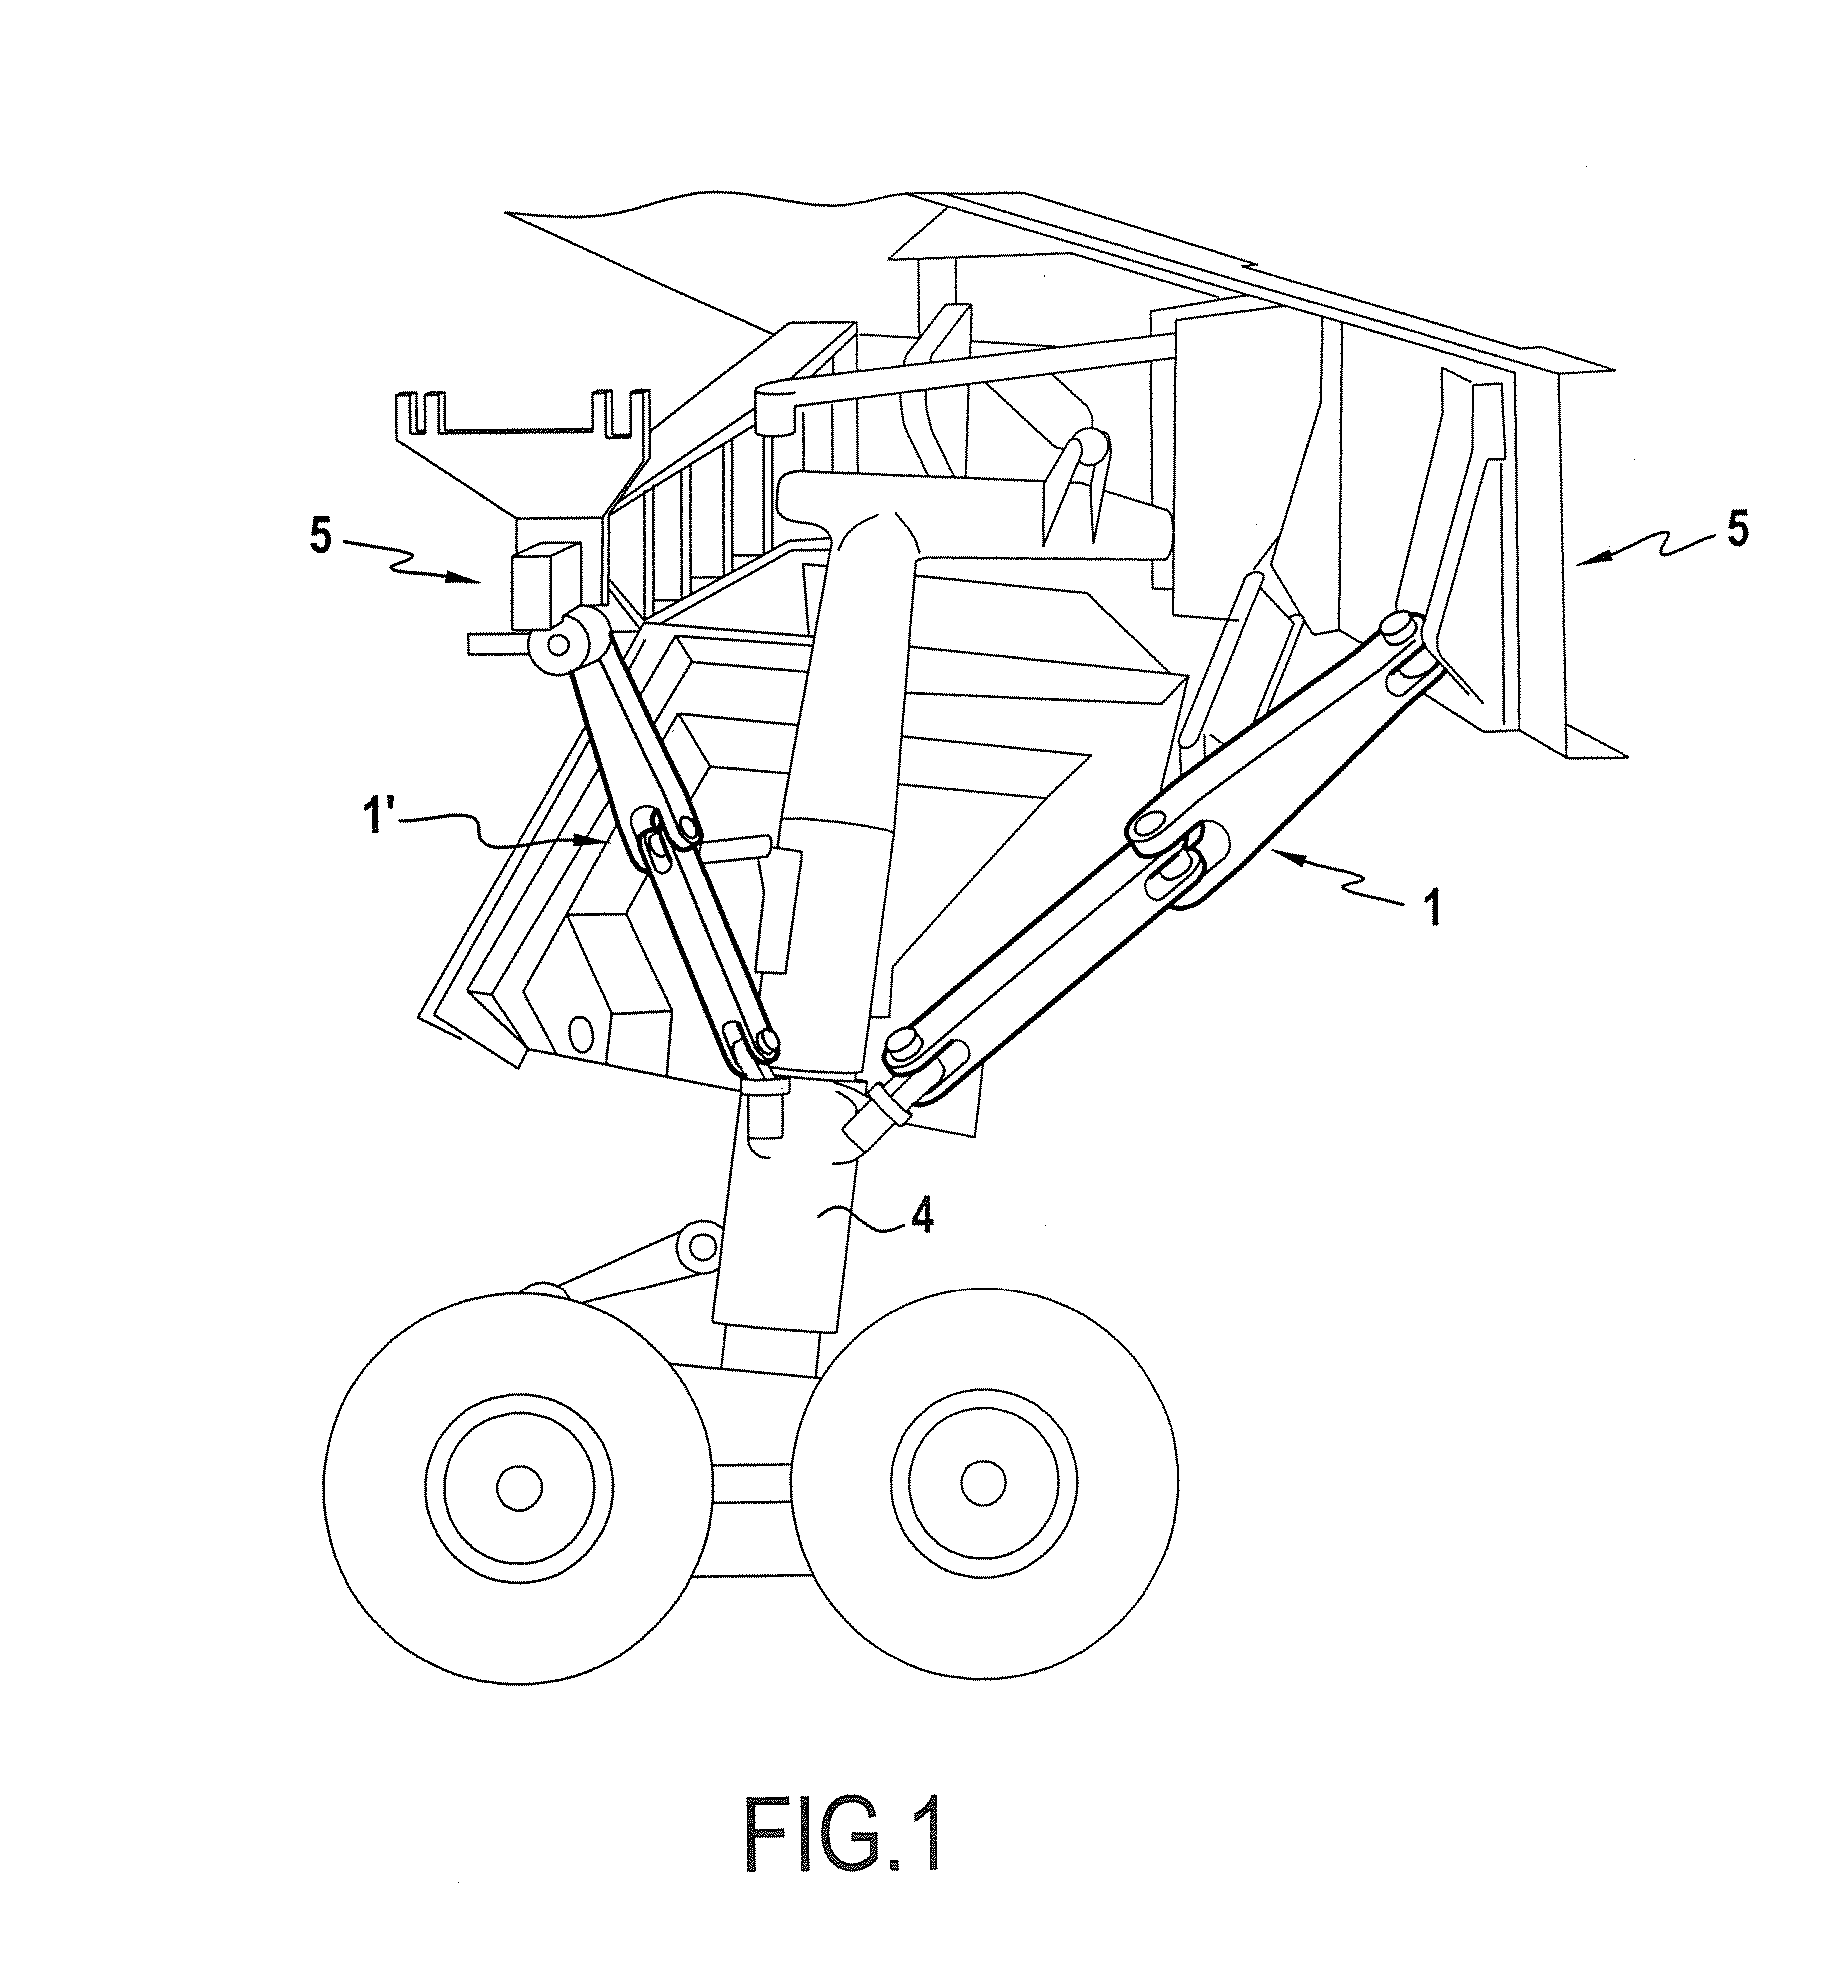 Mechanical part and method of manufacturing such a part